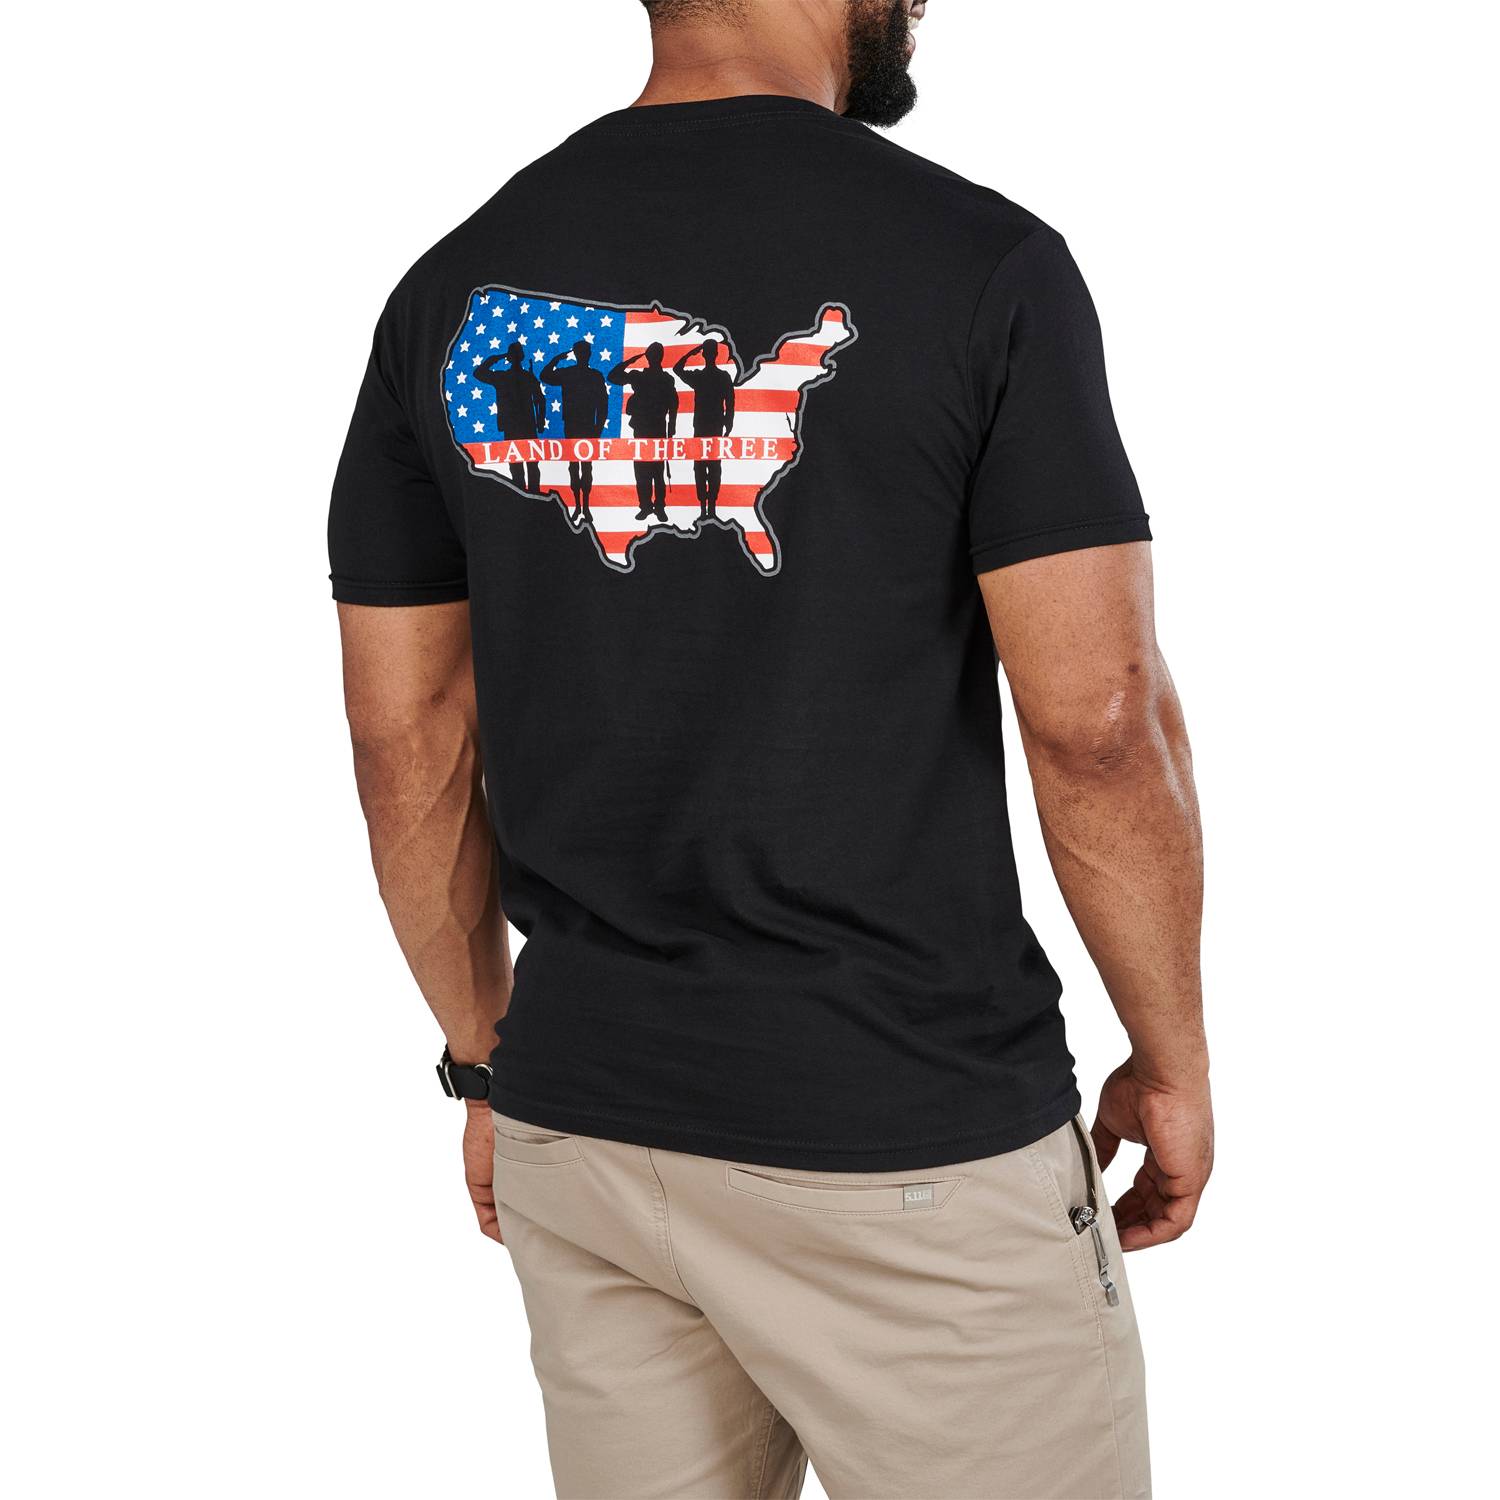 5.11 Land of the Free Graphic T-Shirt